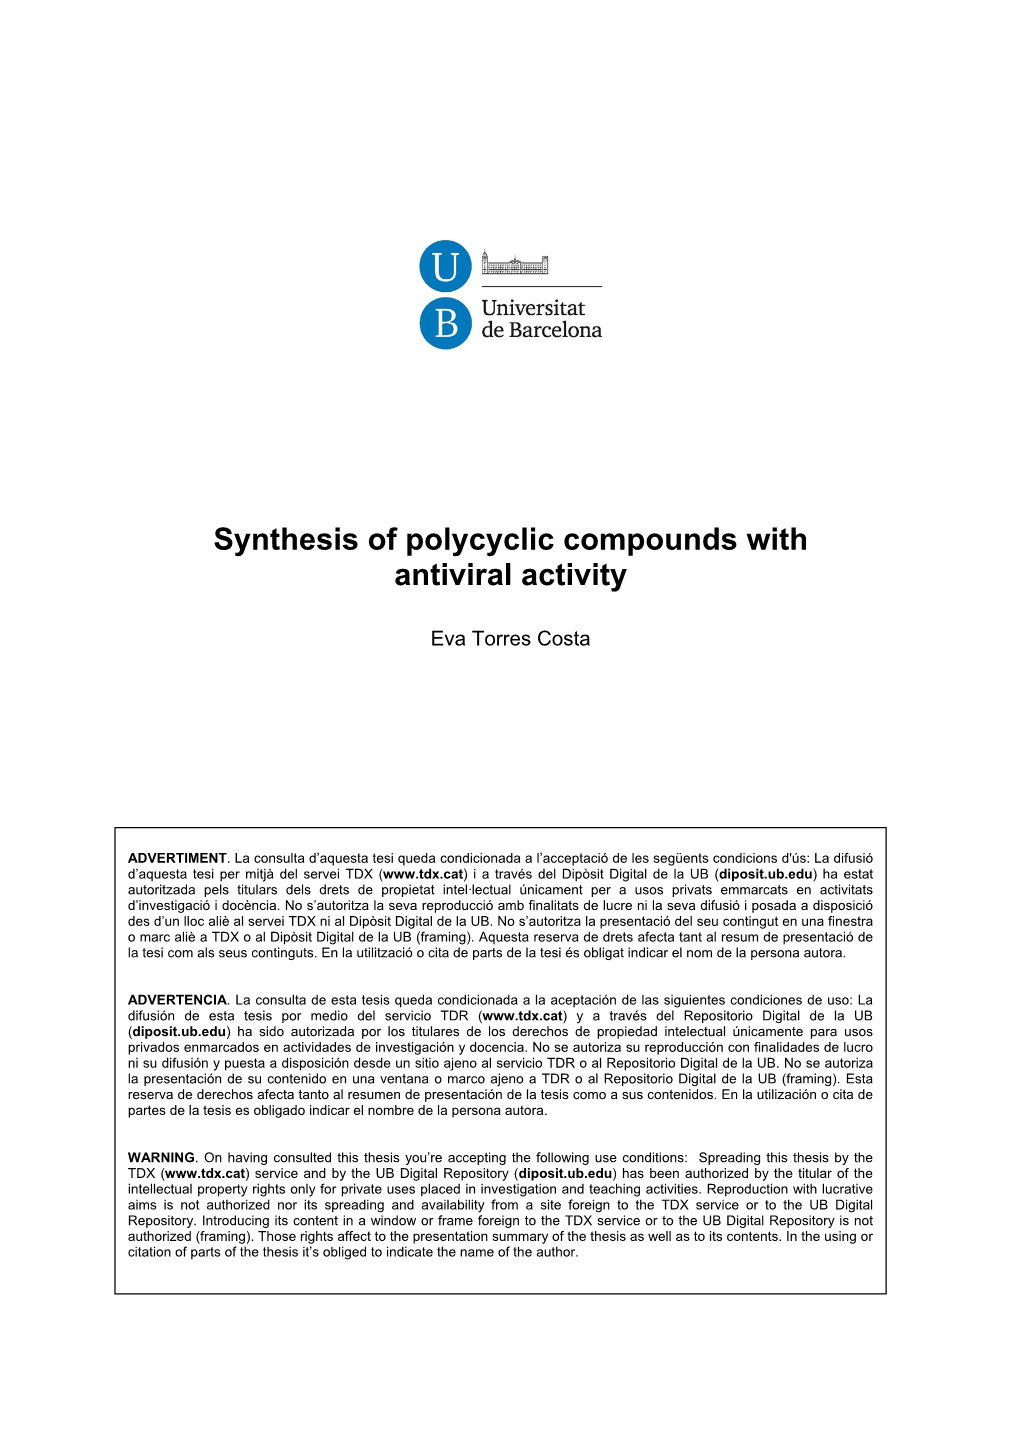 Synthesis of Polycyclic Compounds with Antiviral Activity